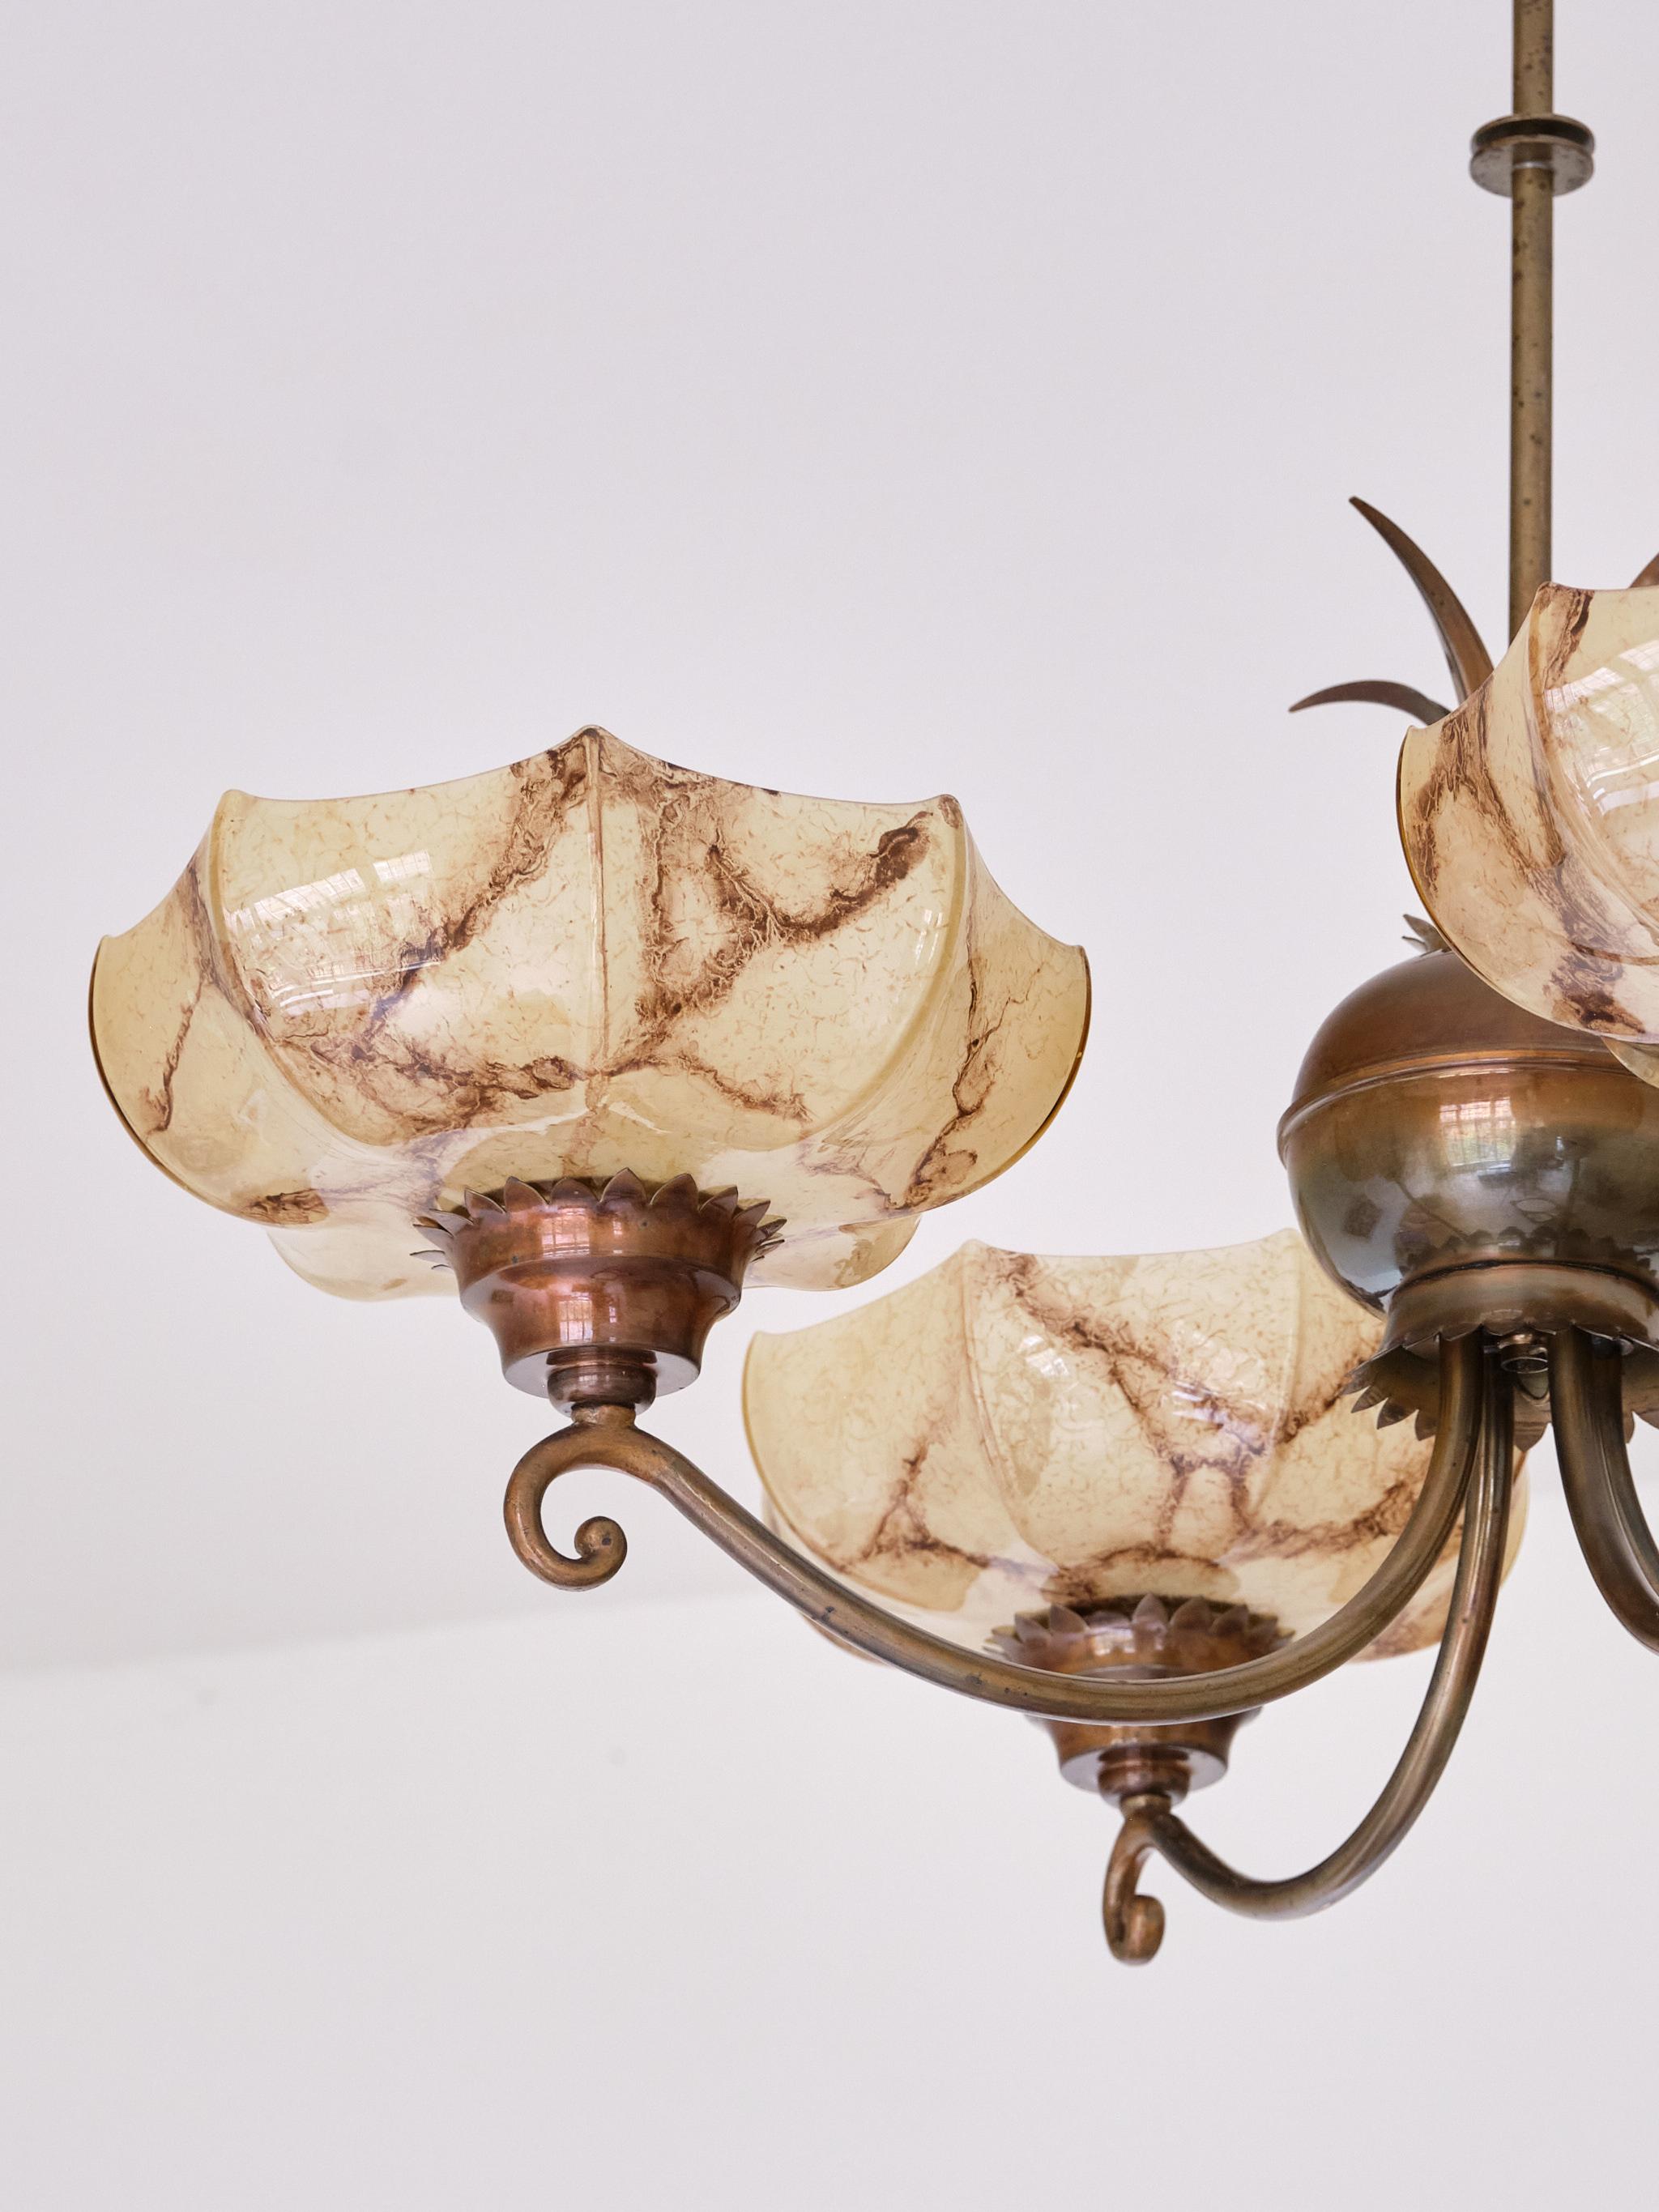 Harald Notini Chandelier in Brass and Marbled Glass, Böhlmarks, Sweden, 1927 For Sale 5